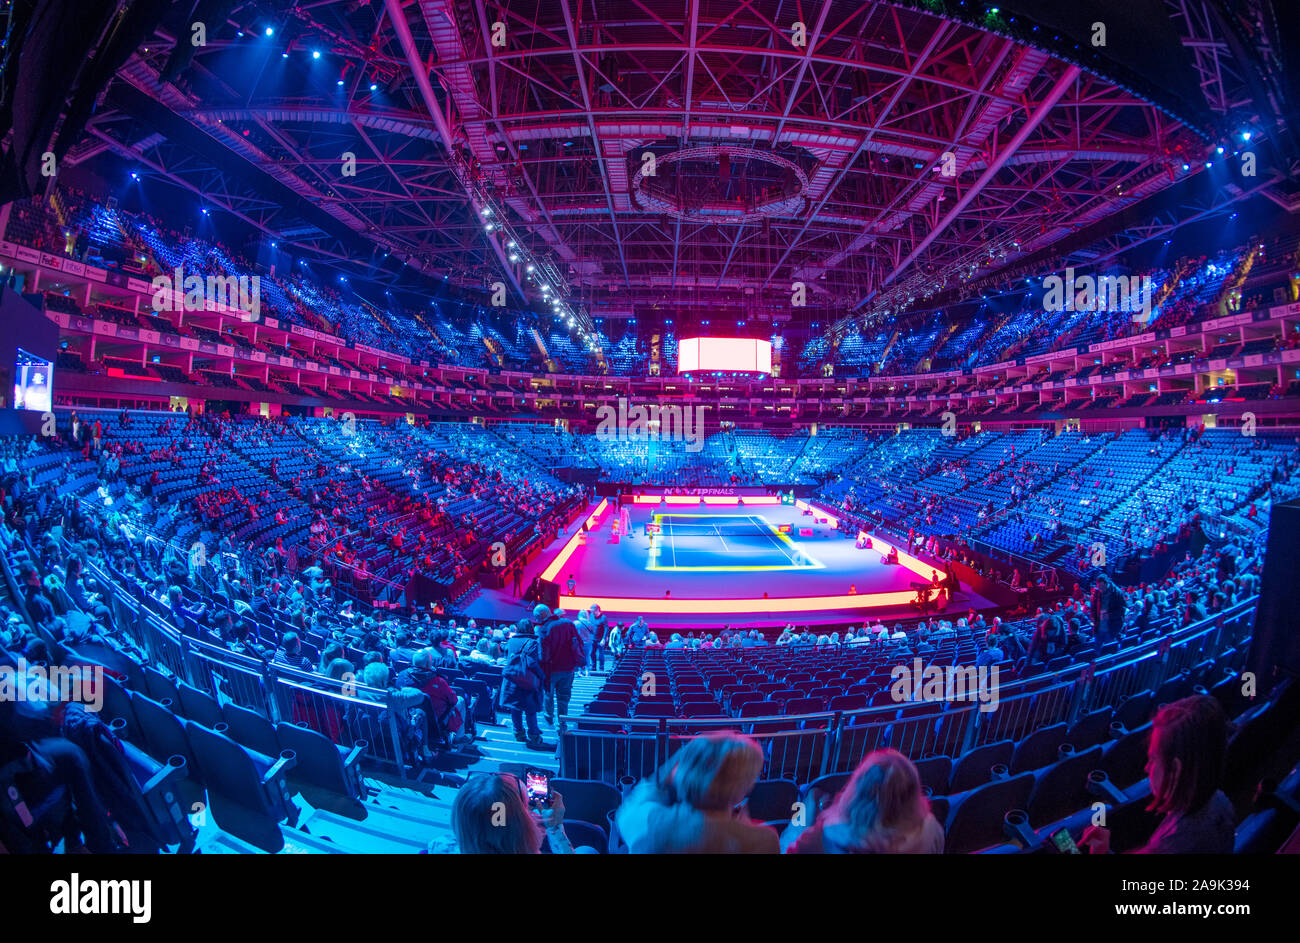 O2, London, UK. 16th November 2019. Visitors arrive in the O2 arena for  semi-finals day at the 2019 Nitto ATP Finals as centre court prepares for  the afternoon session of doubles and